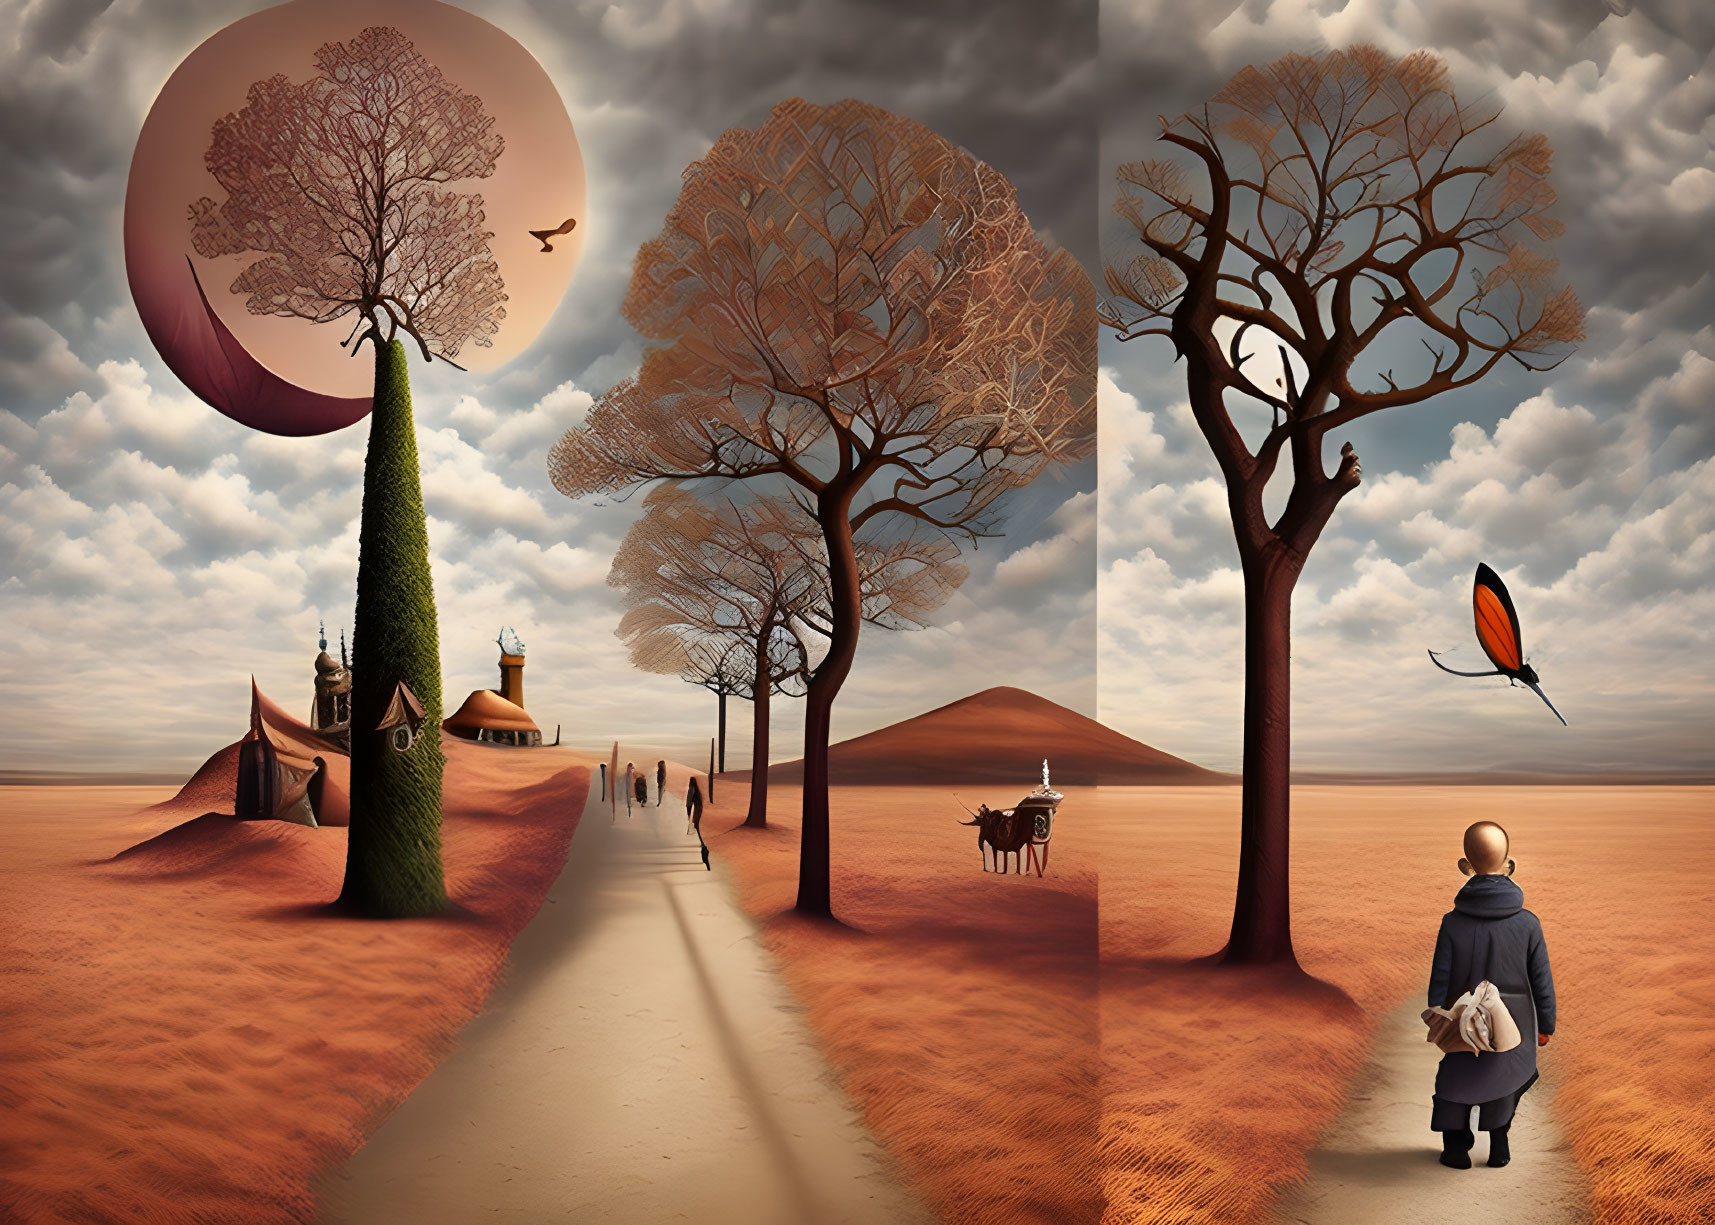 Surreal desert landscape with oversized trees, monk, dunes, tents, couple, feather,